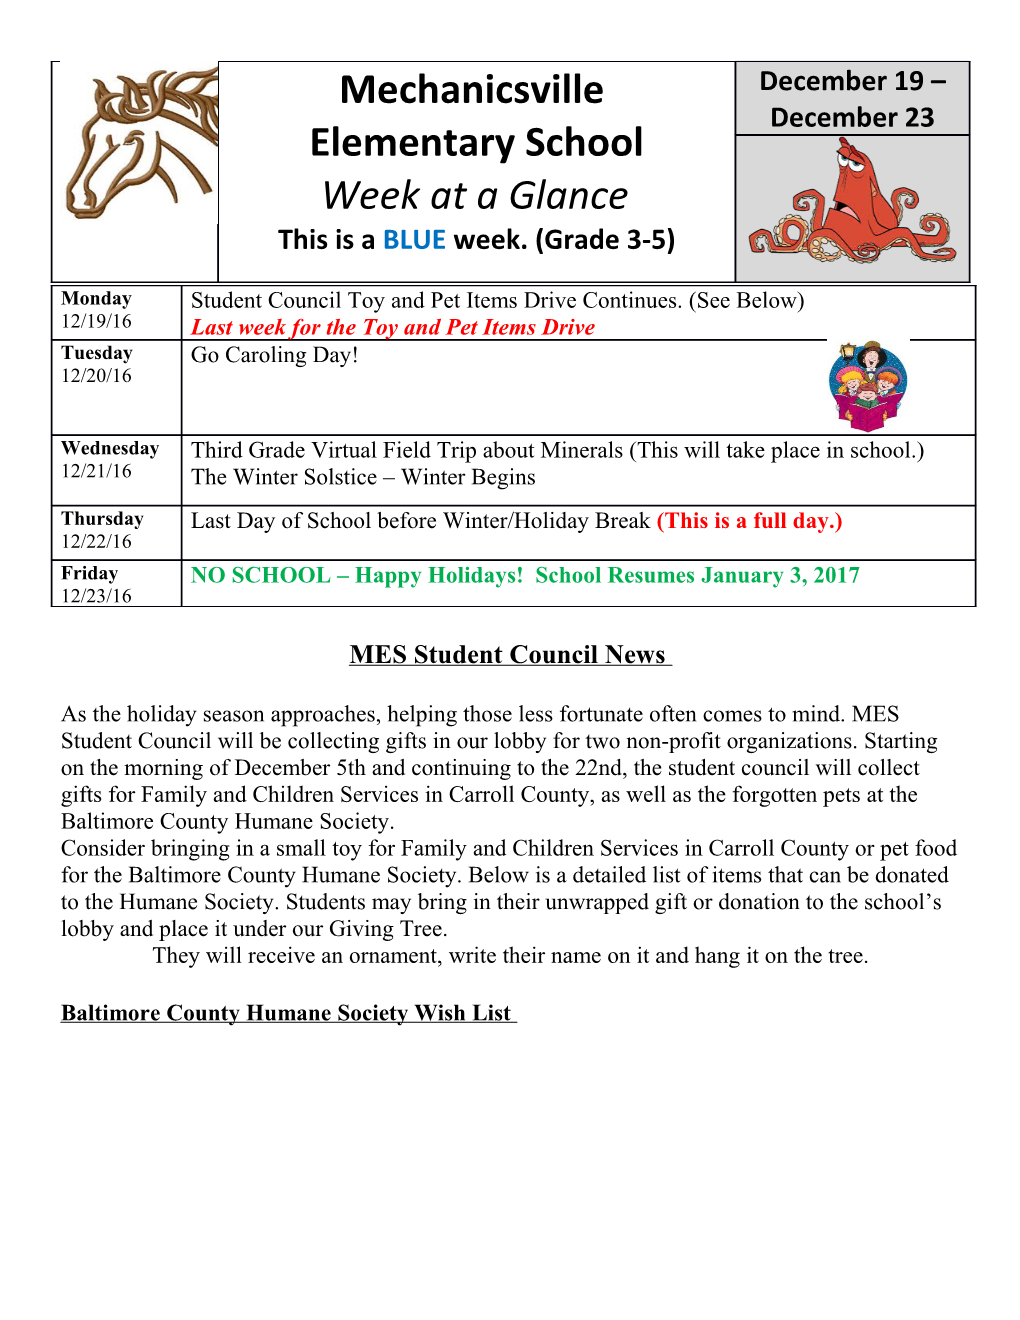 MES Student Council News